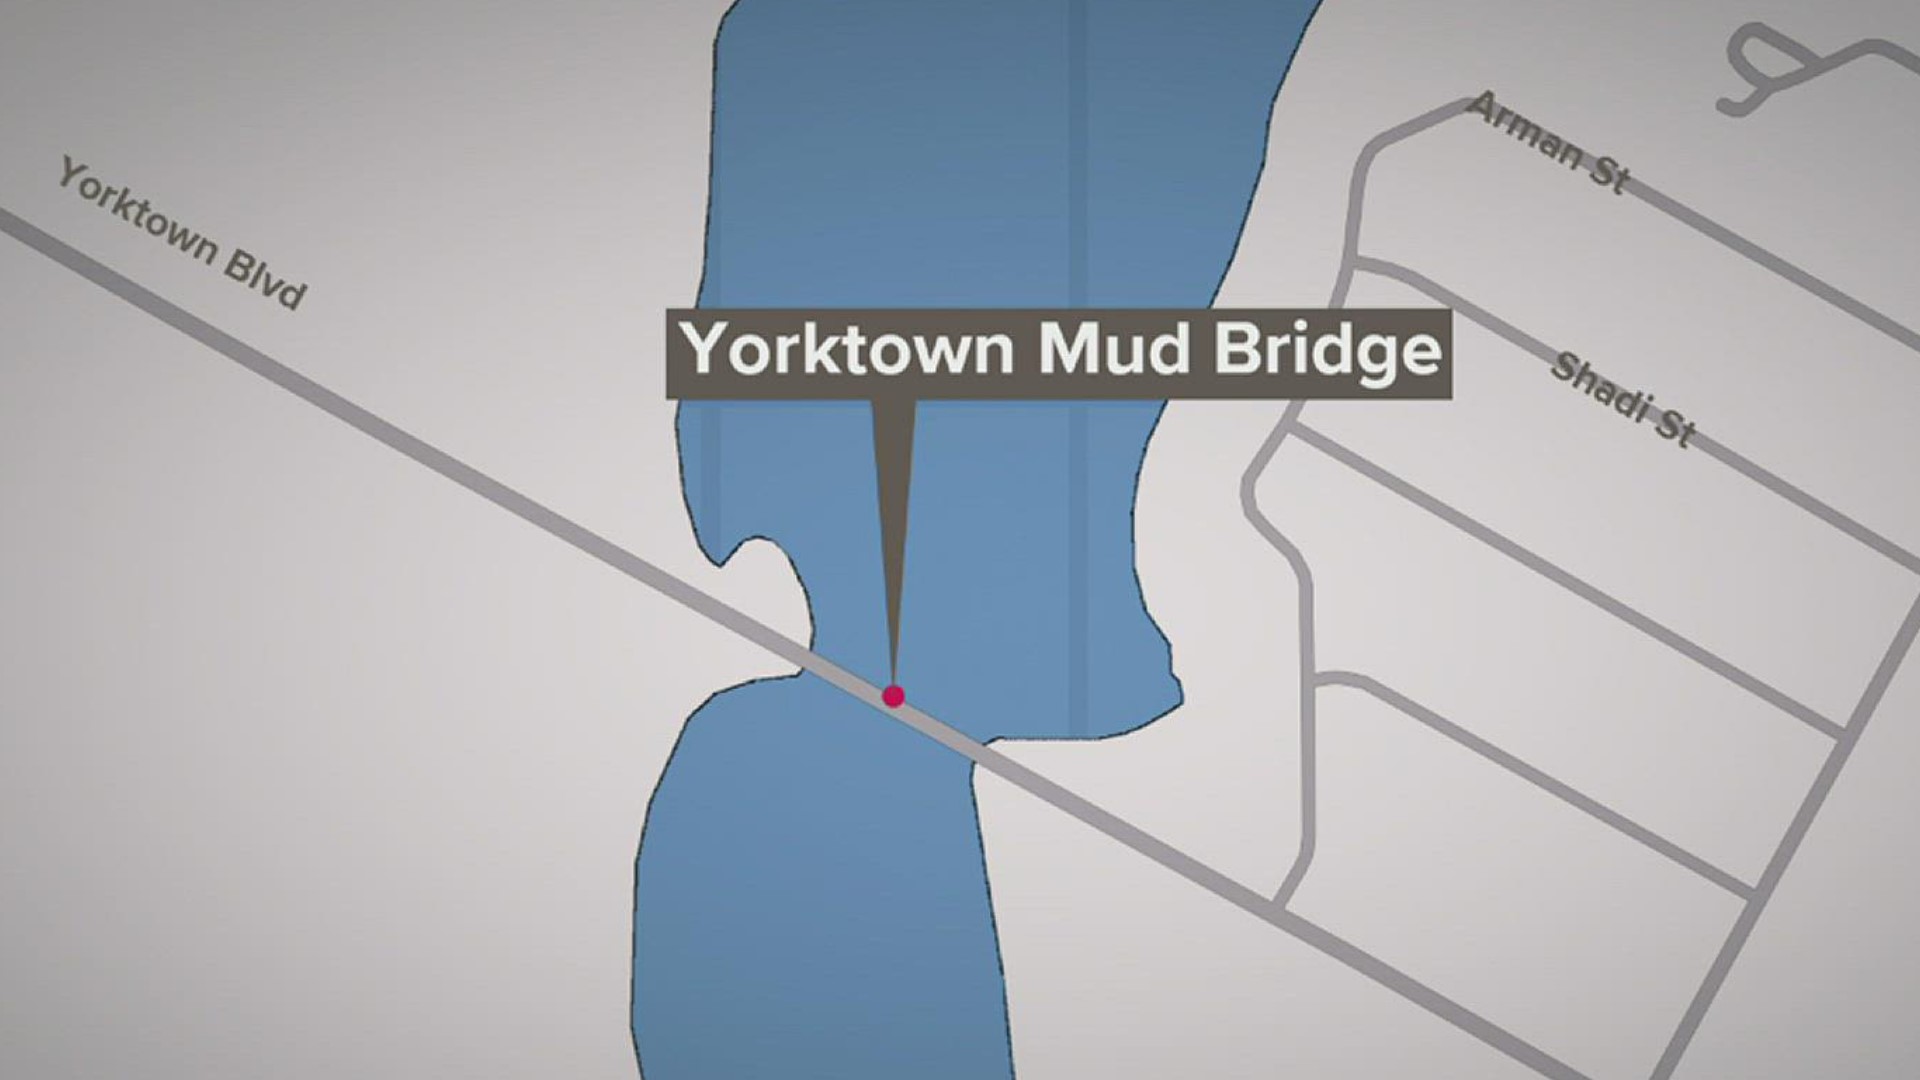 The Yorktown and Ocean Drive bridges at the Oso Bay were selected to be replaced under the federal Highway Bridge Replacement and Rehabilitation Program.